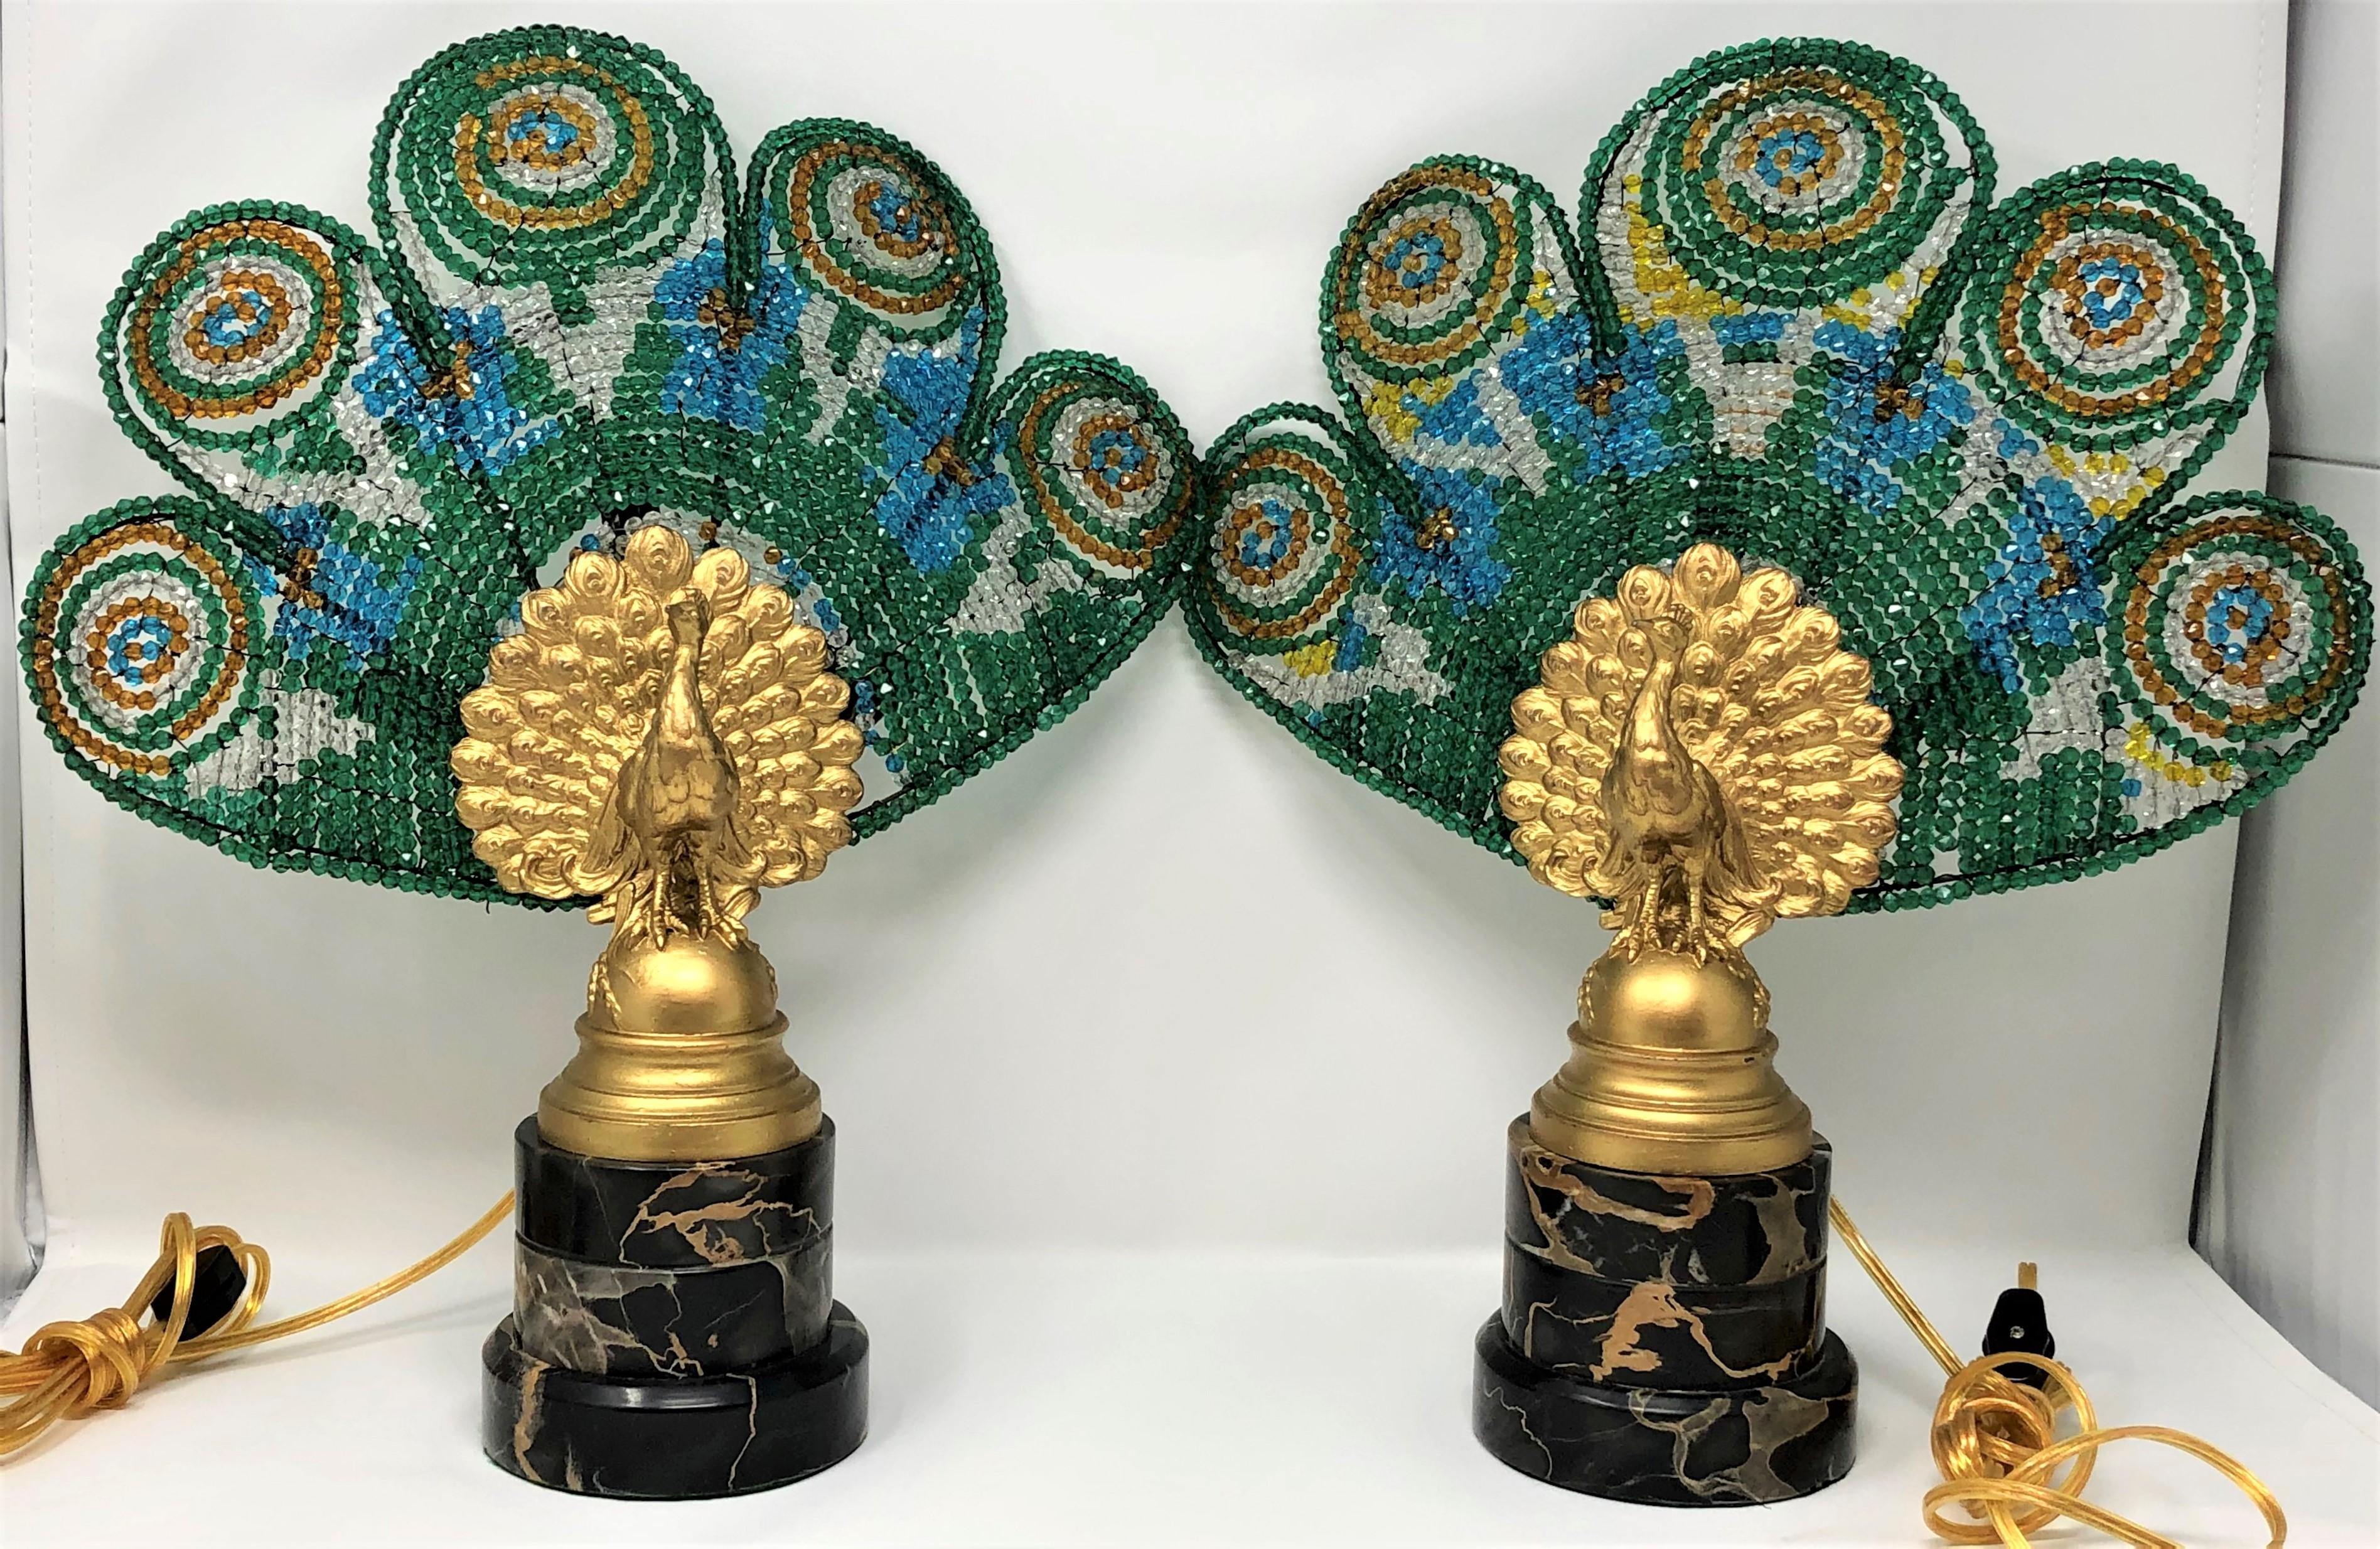 Pair of antique Austrian peacock lamps, bronze and marble with art glass plumes, circa 1920-1930.
Measures: Base is 4 1/2